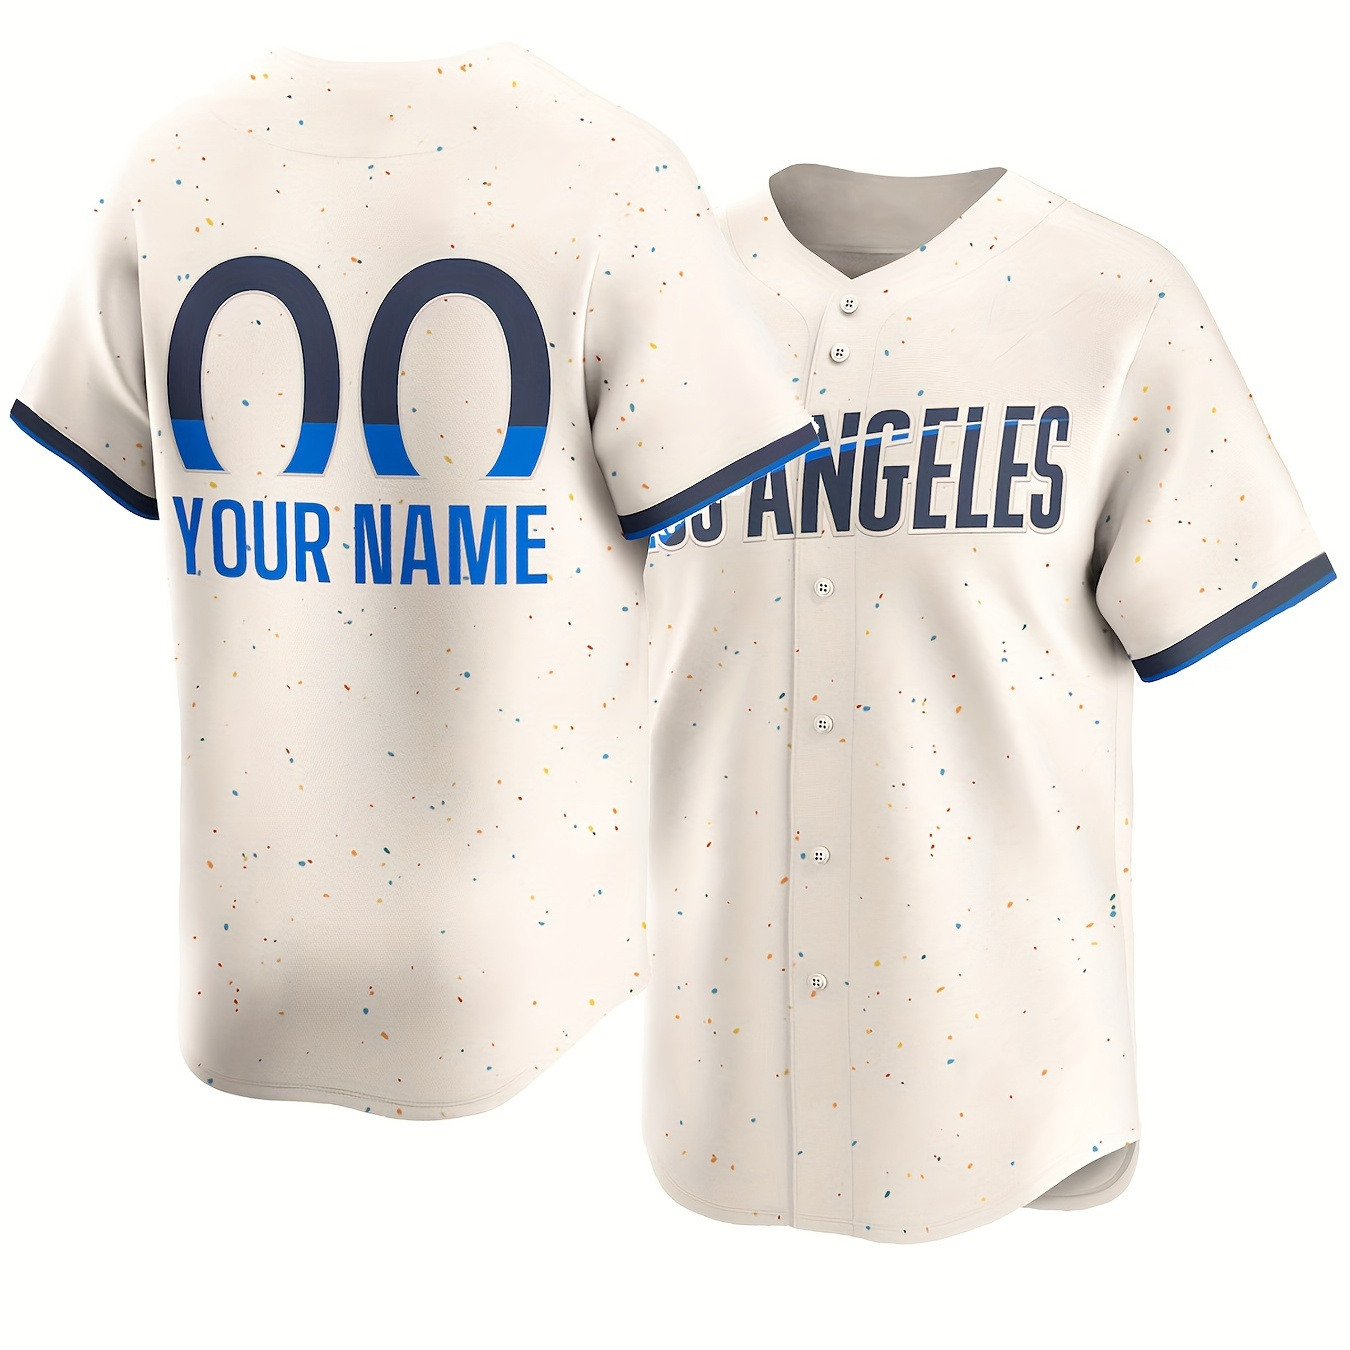 

Men's Customized Name & Number V-neck Baseball Jersey, Tailored To Your Preference, Comfy Top For Summer Sport